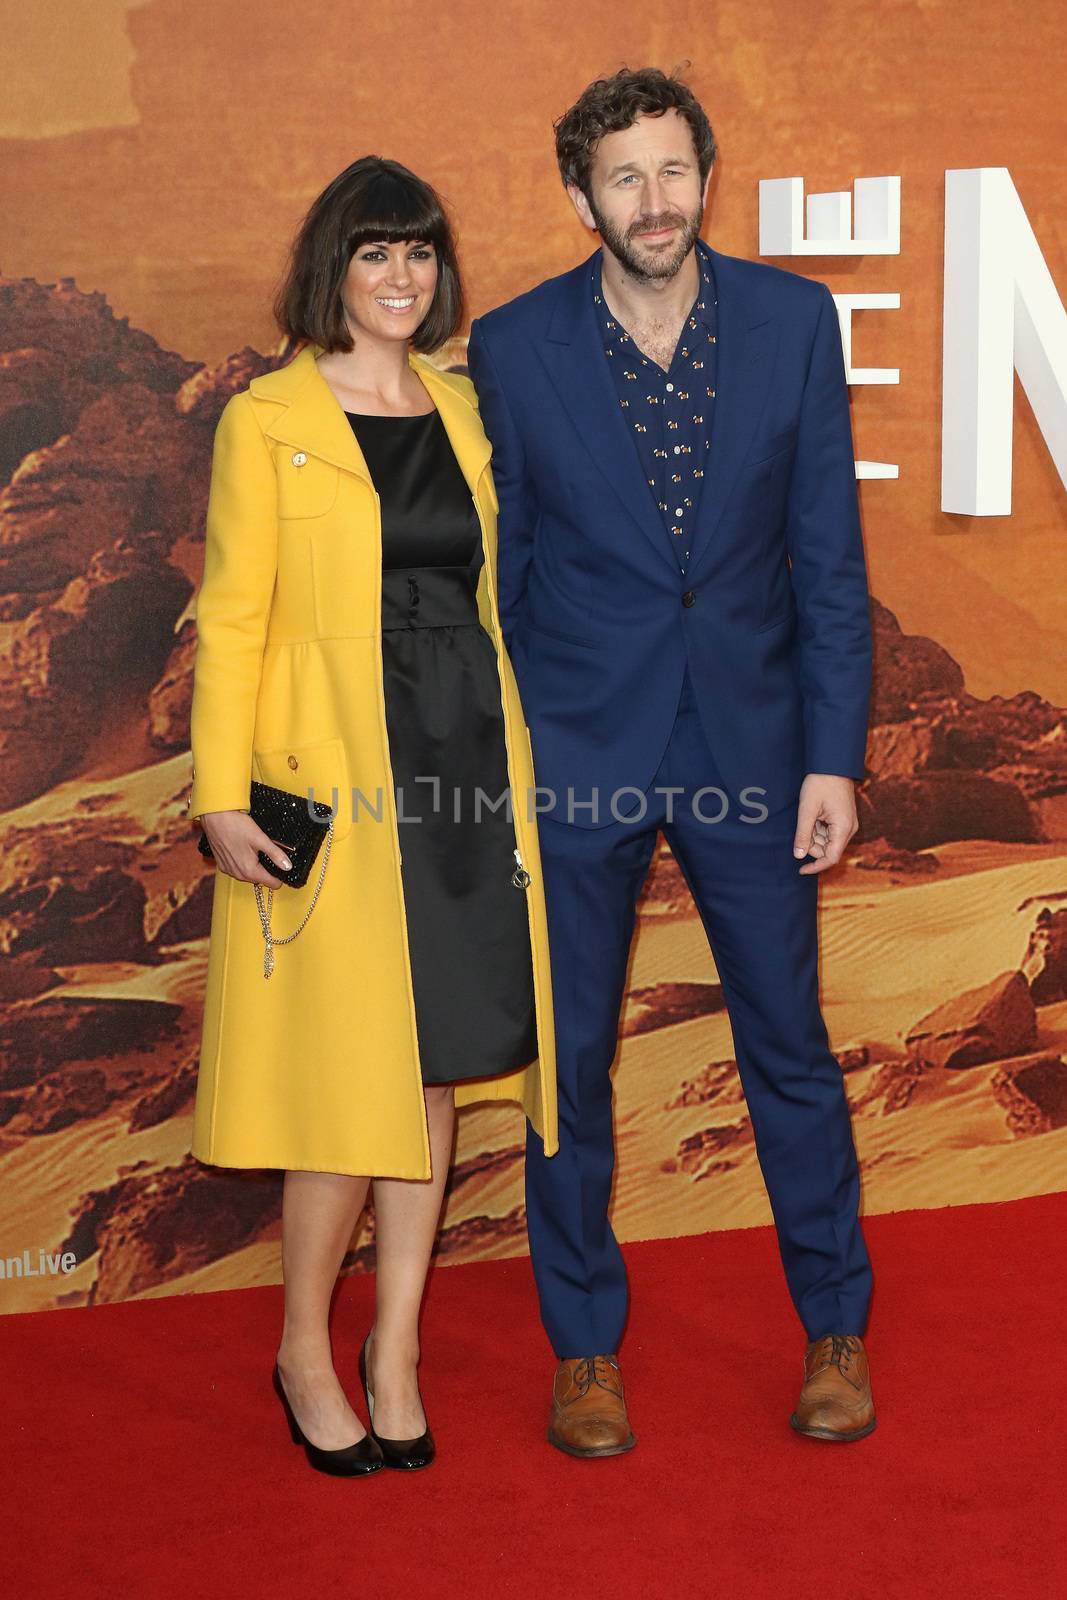 ENGLAND, London: Dawn O'Porter and Chris O'Dowd attend the European premiere of The Martian in Leicester Square in London, UK on September 24, 2015